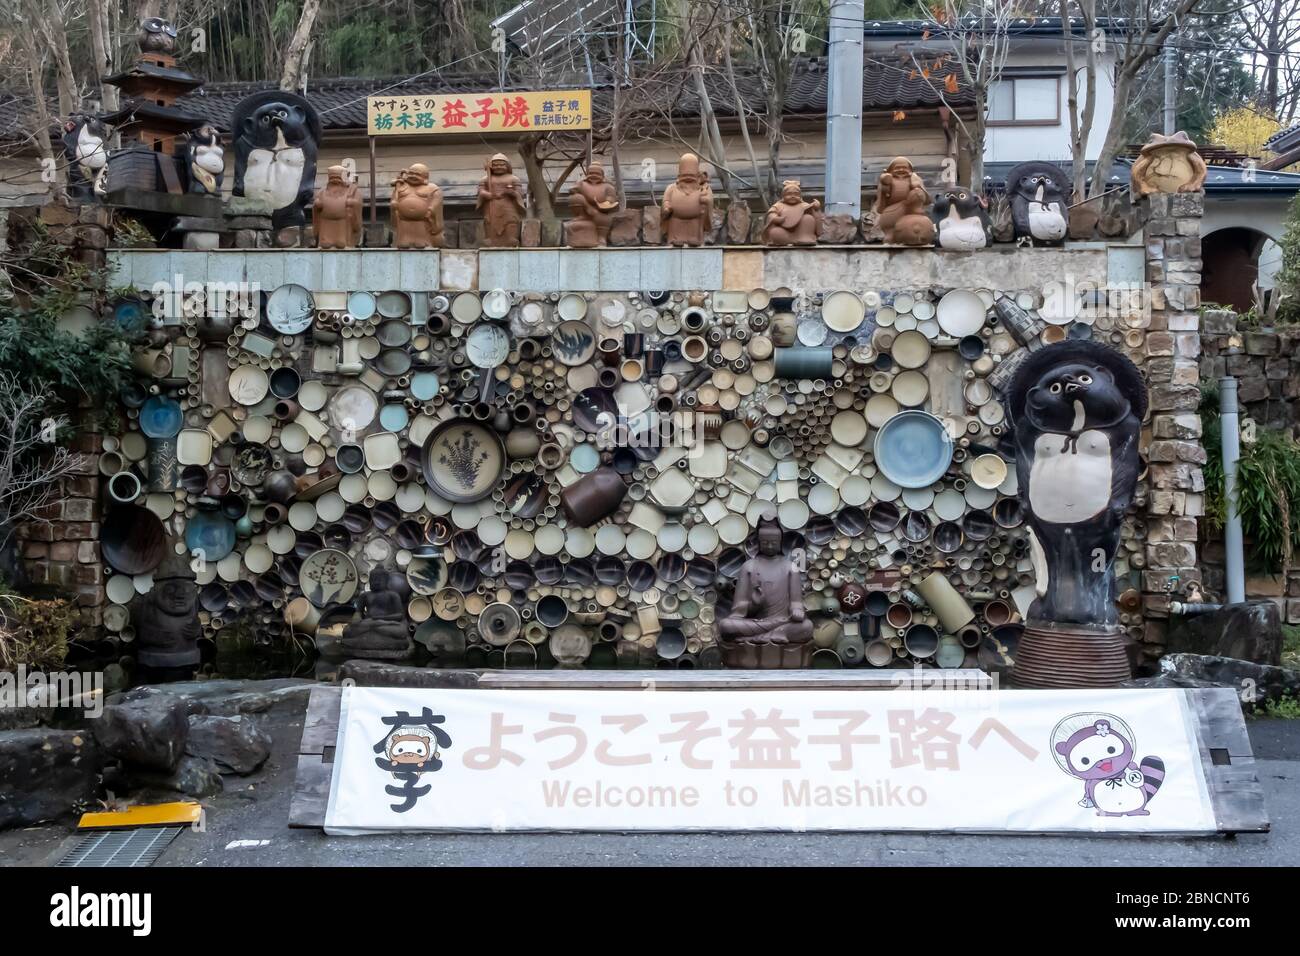 Tochigi, Japan - March 21, 2019: View of Mashiko, the traditional pottery town of Japan, popular for mashikoyaki, a type of Japanese pottery tradition Stock Photo